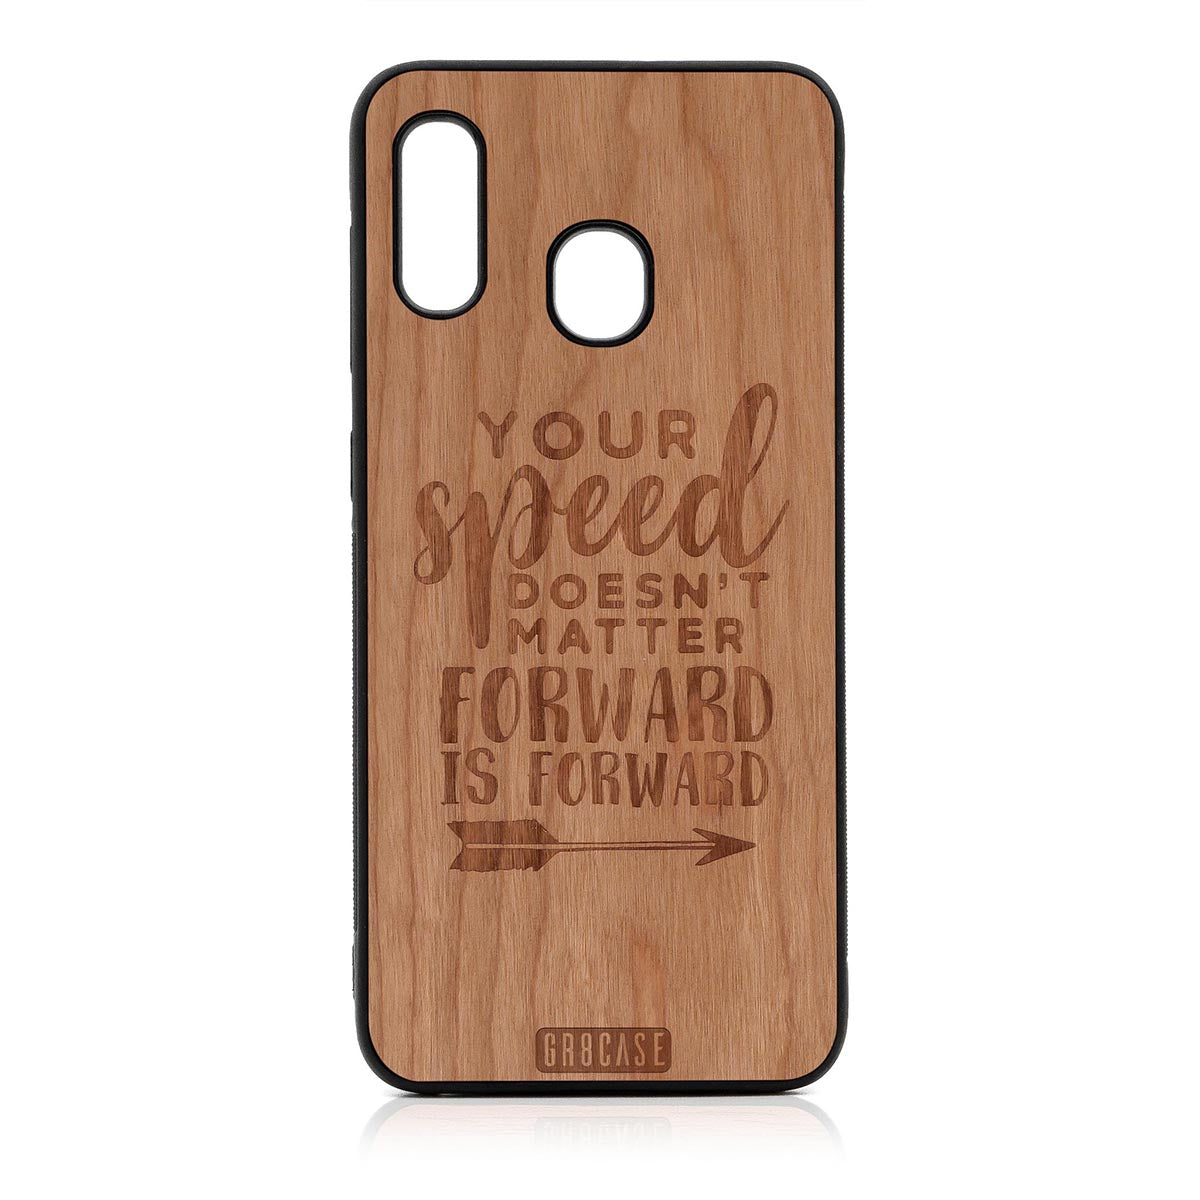 Your Speed Doesn't Matter Forward Is Forward Design Wood Case For Samsung Galaxy A20